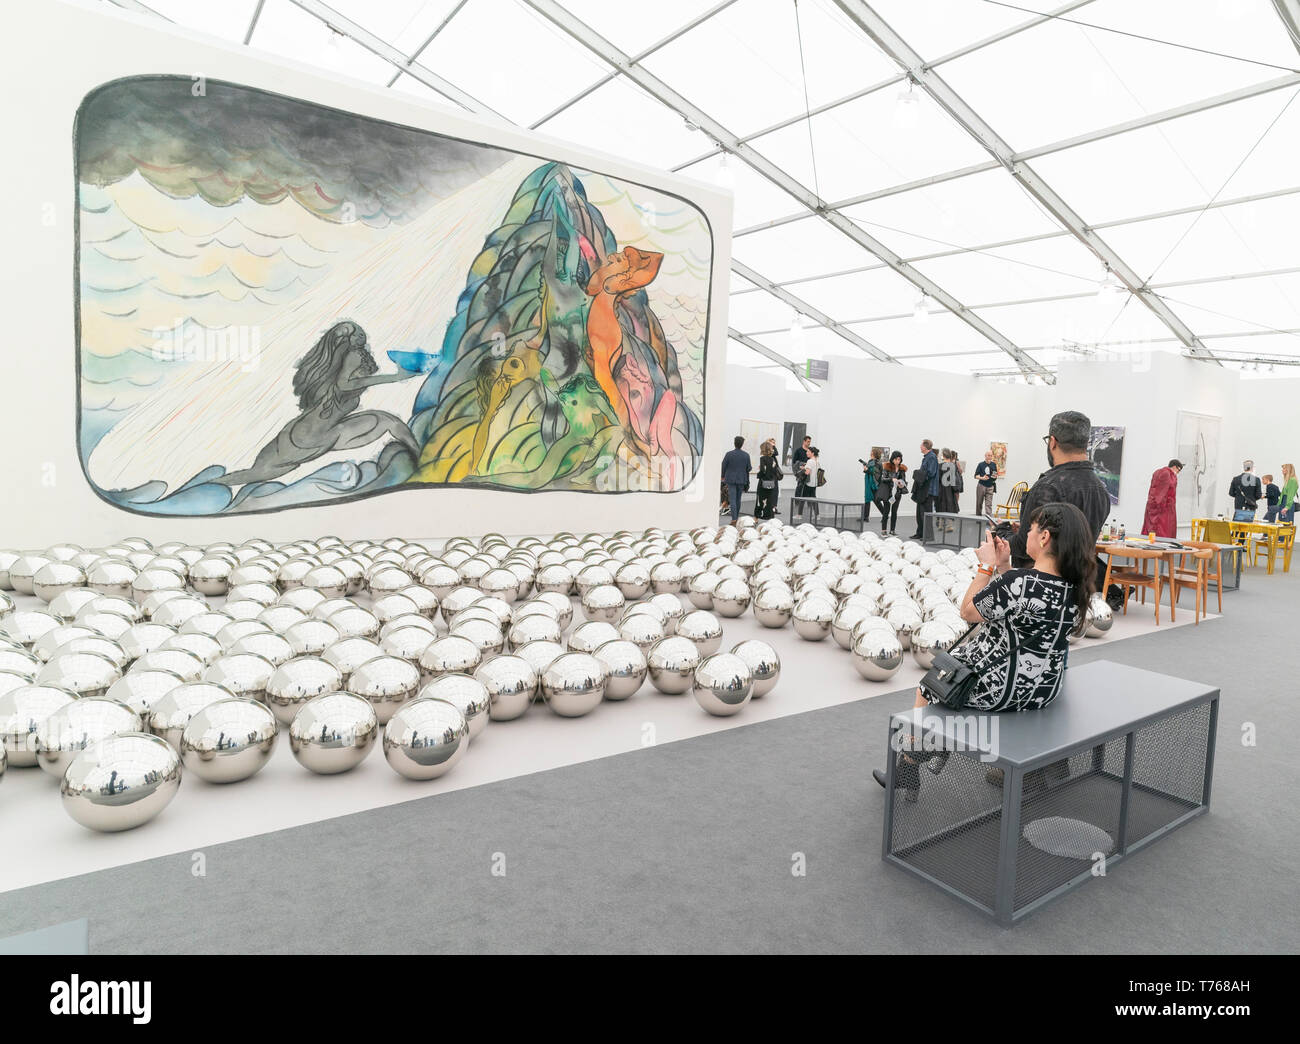 New York, NY - May 2, 2019: Atmosphere during the Frieze Art Fair 2019 VIP Press Preview at Randalls Island Stock Photo